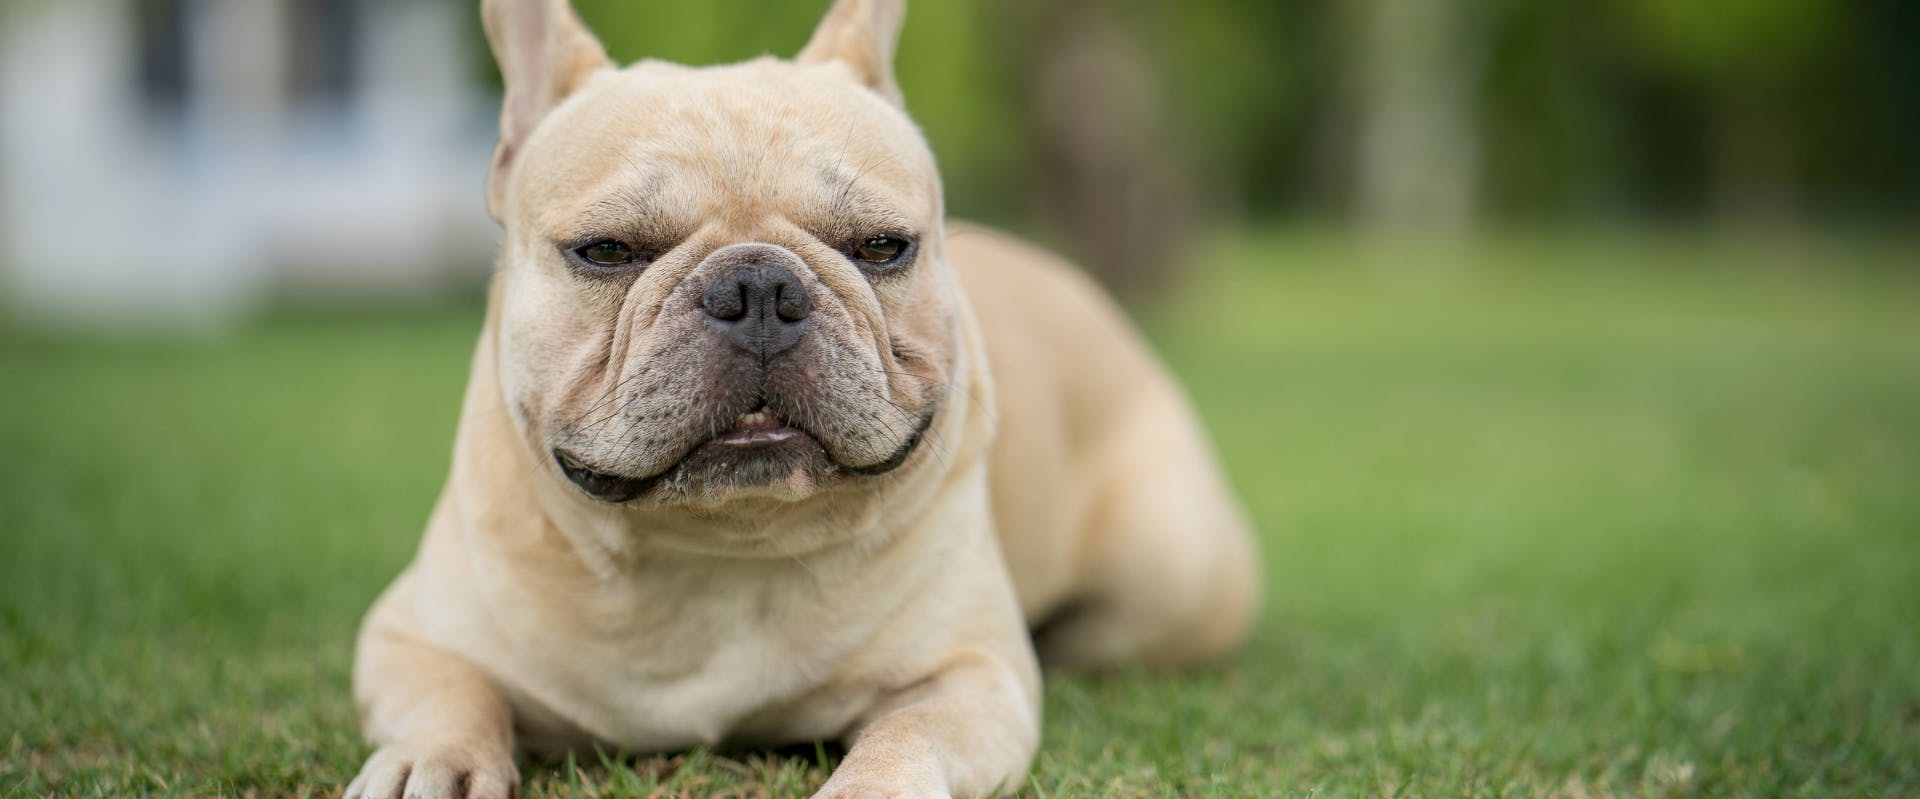 blond french bulldog sitting on the grass in a park